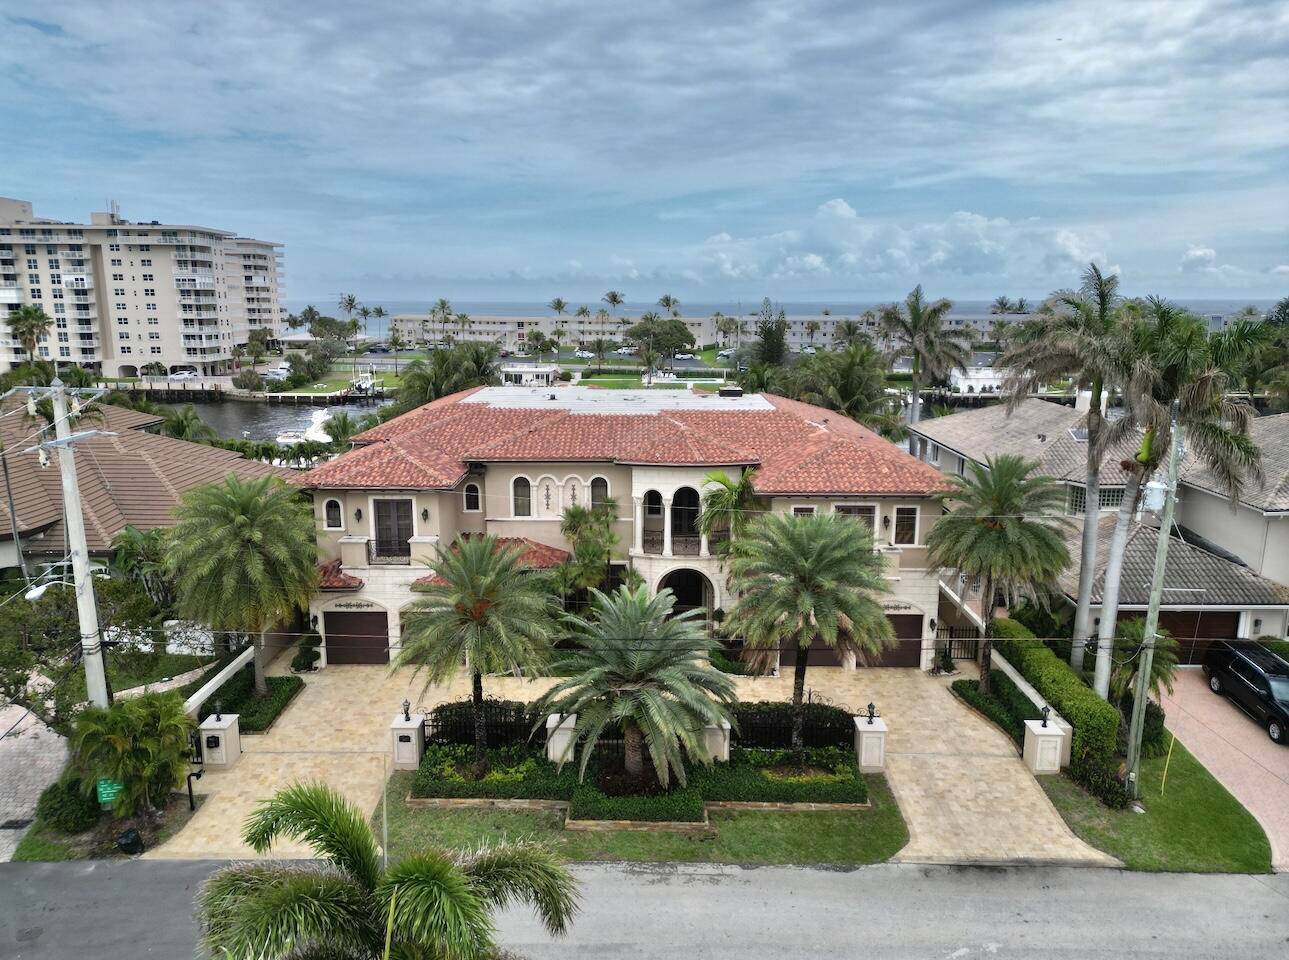 PICS COMING ! Simply spectacular 65279 ; waterfront estate directly on the Intracoastal in the ''NO WAKE'' zone located only 1 mile north of Hillsboro Inlet.